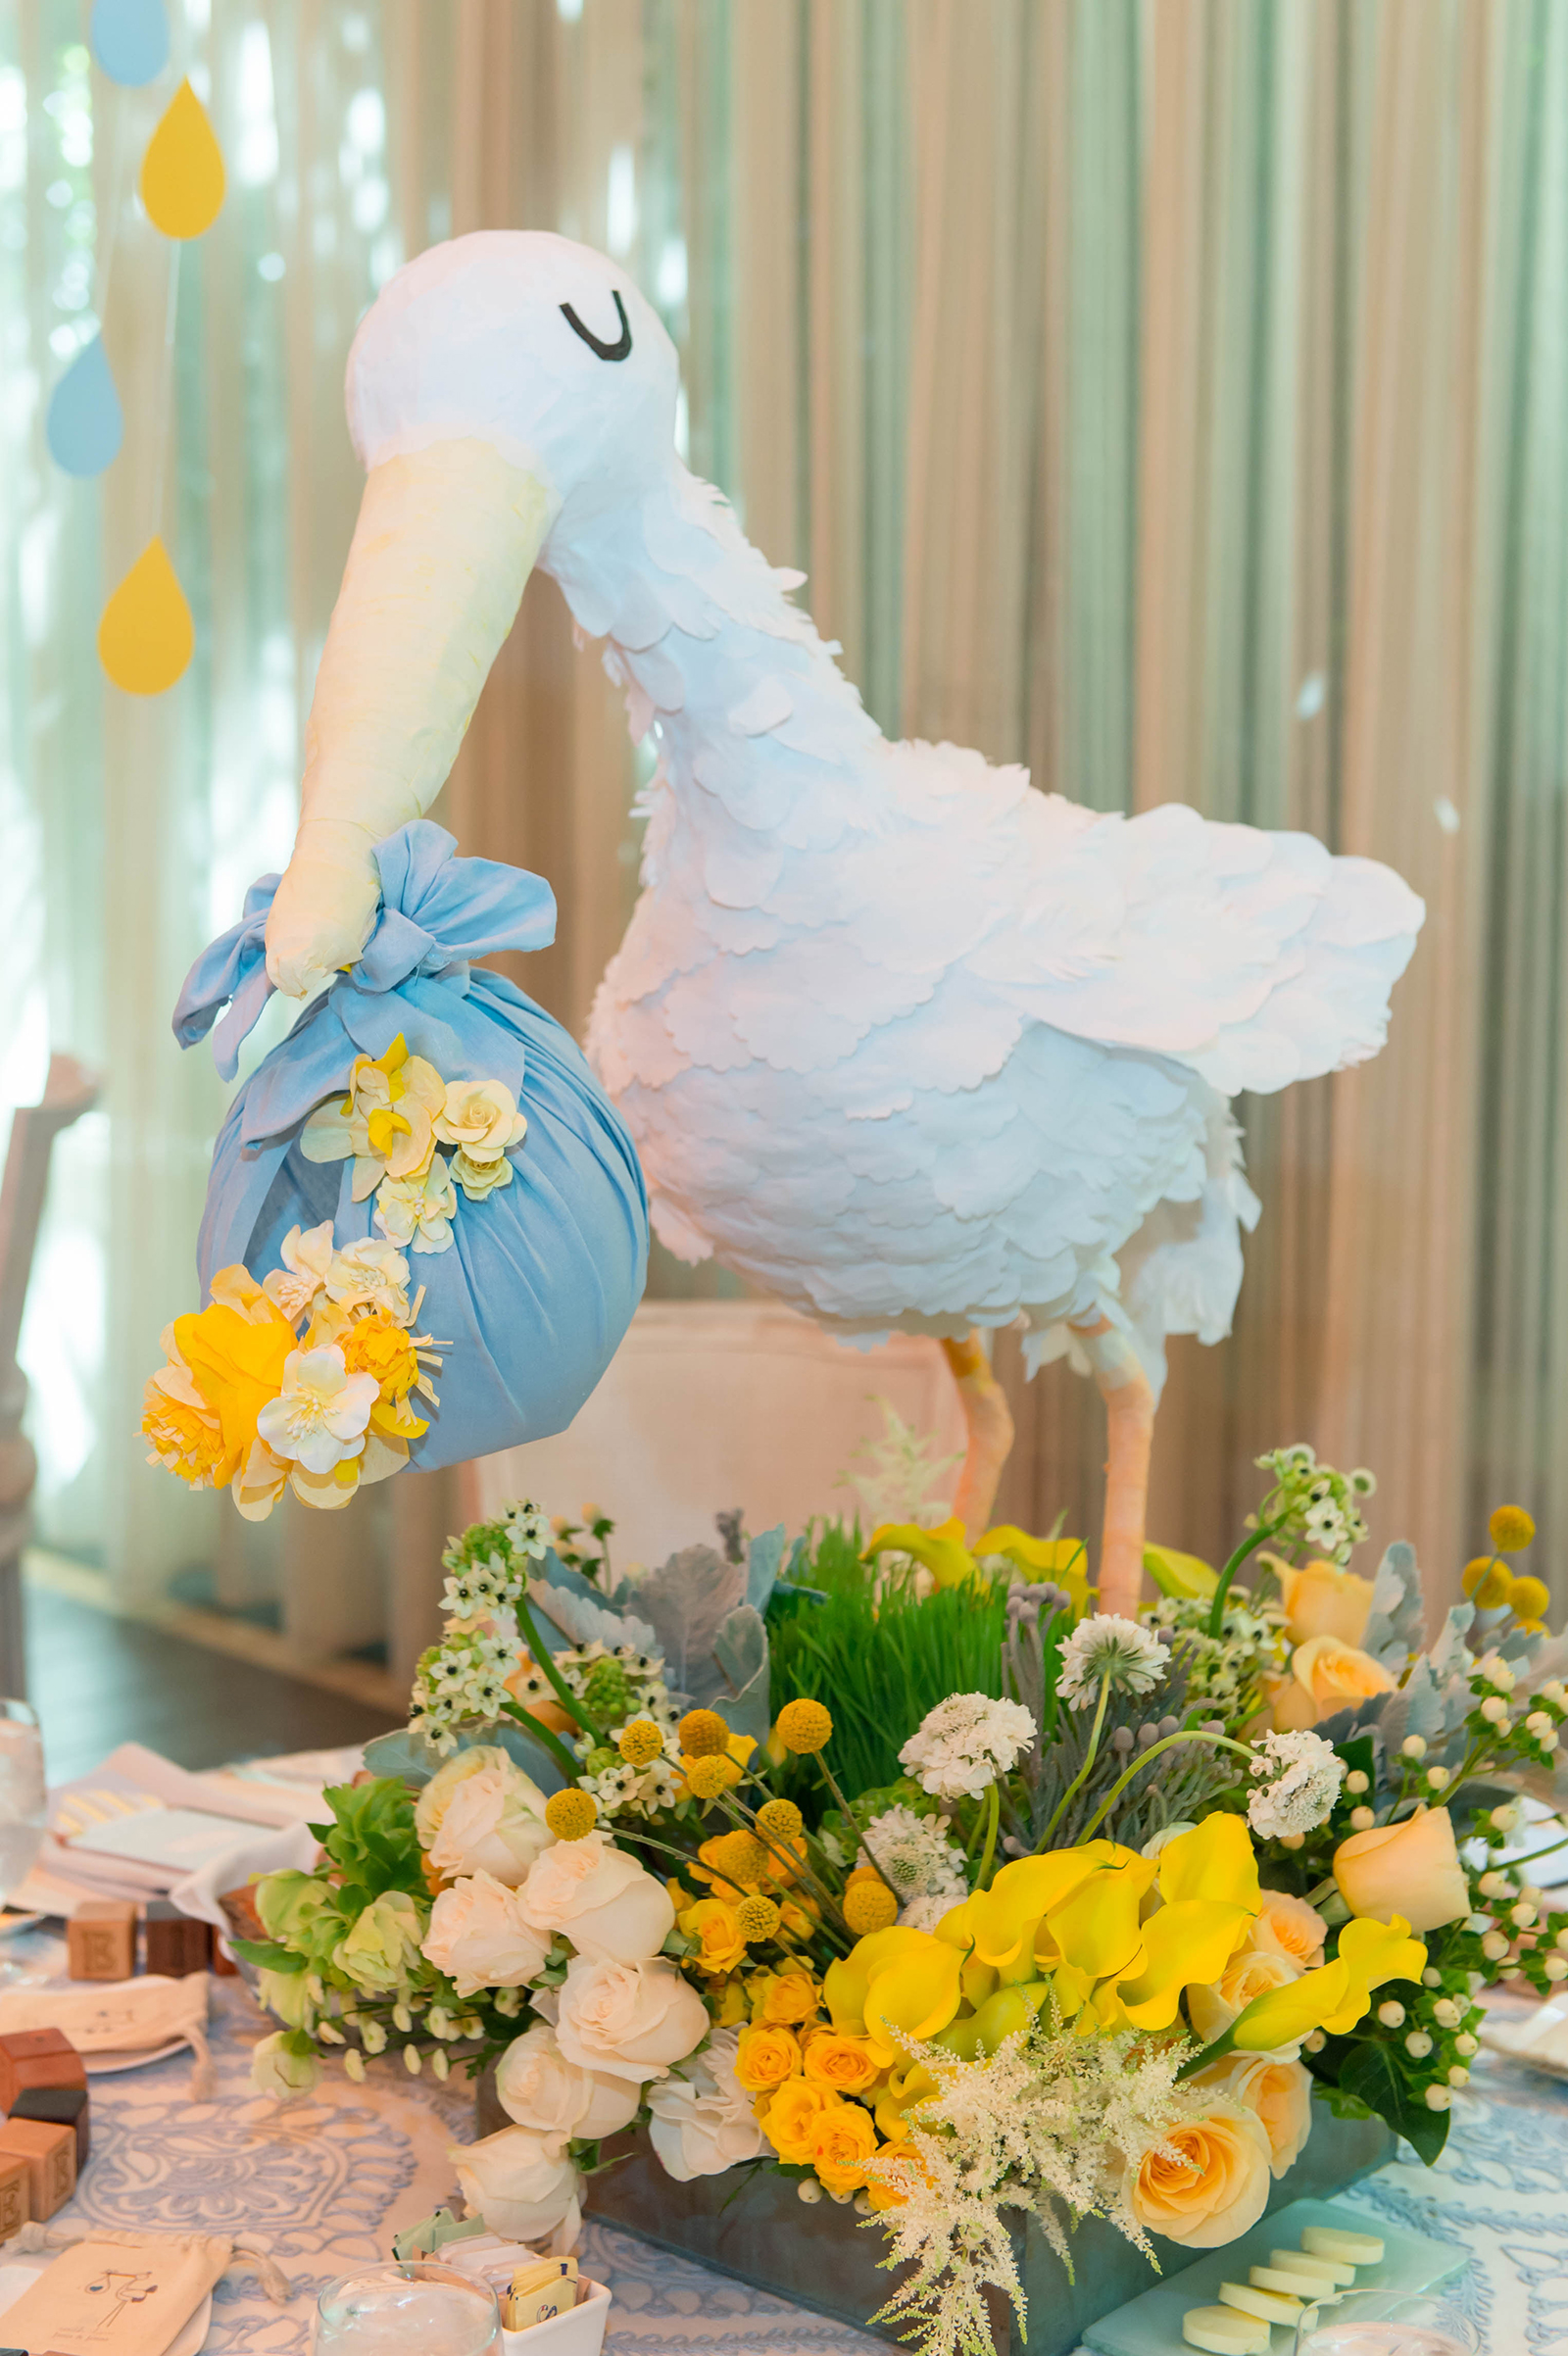 four-seasons-beverly-hills-baby-shower-10